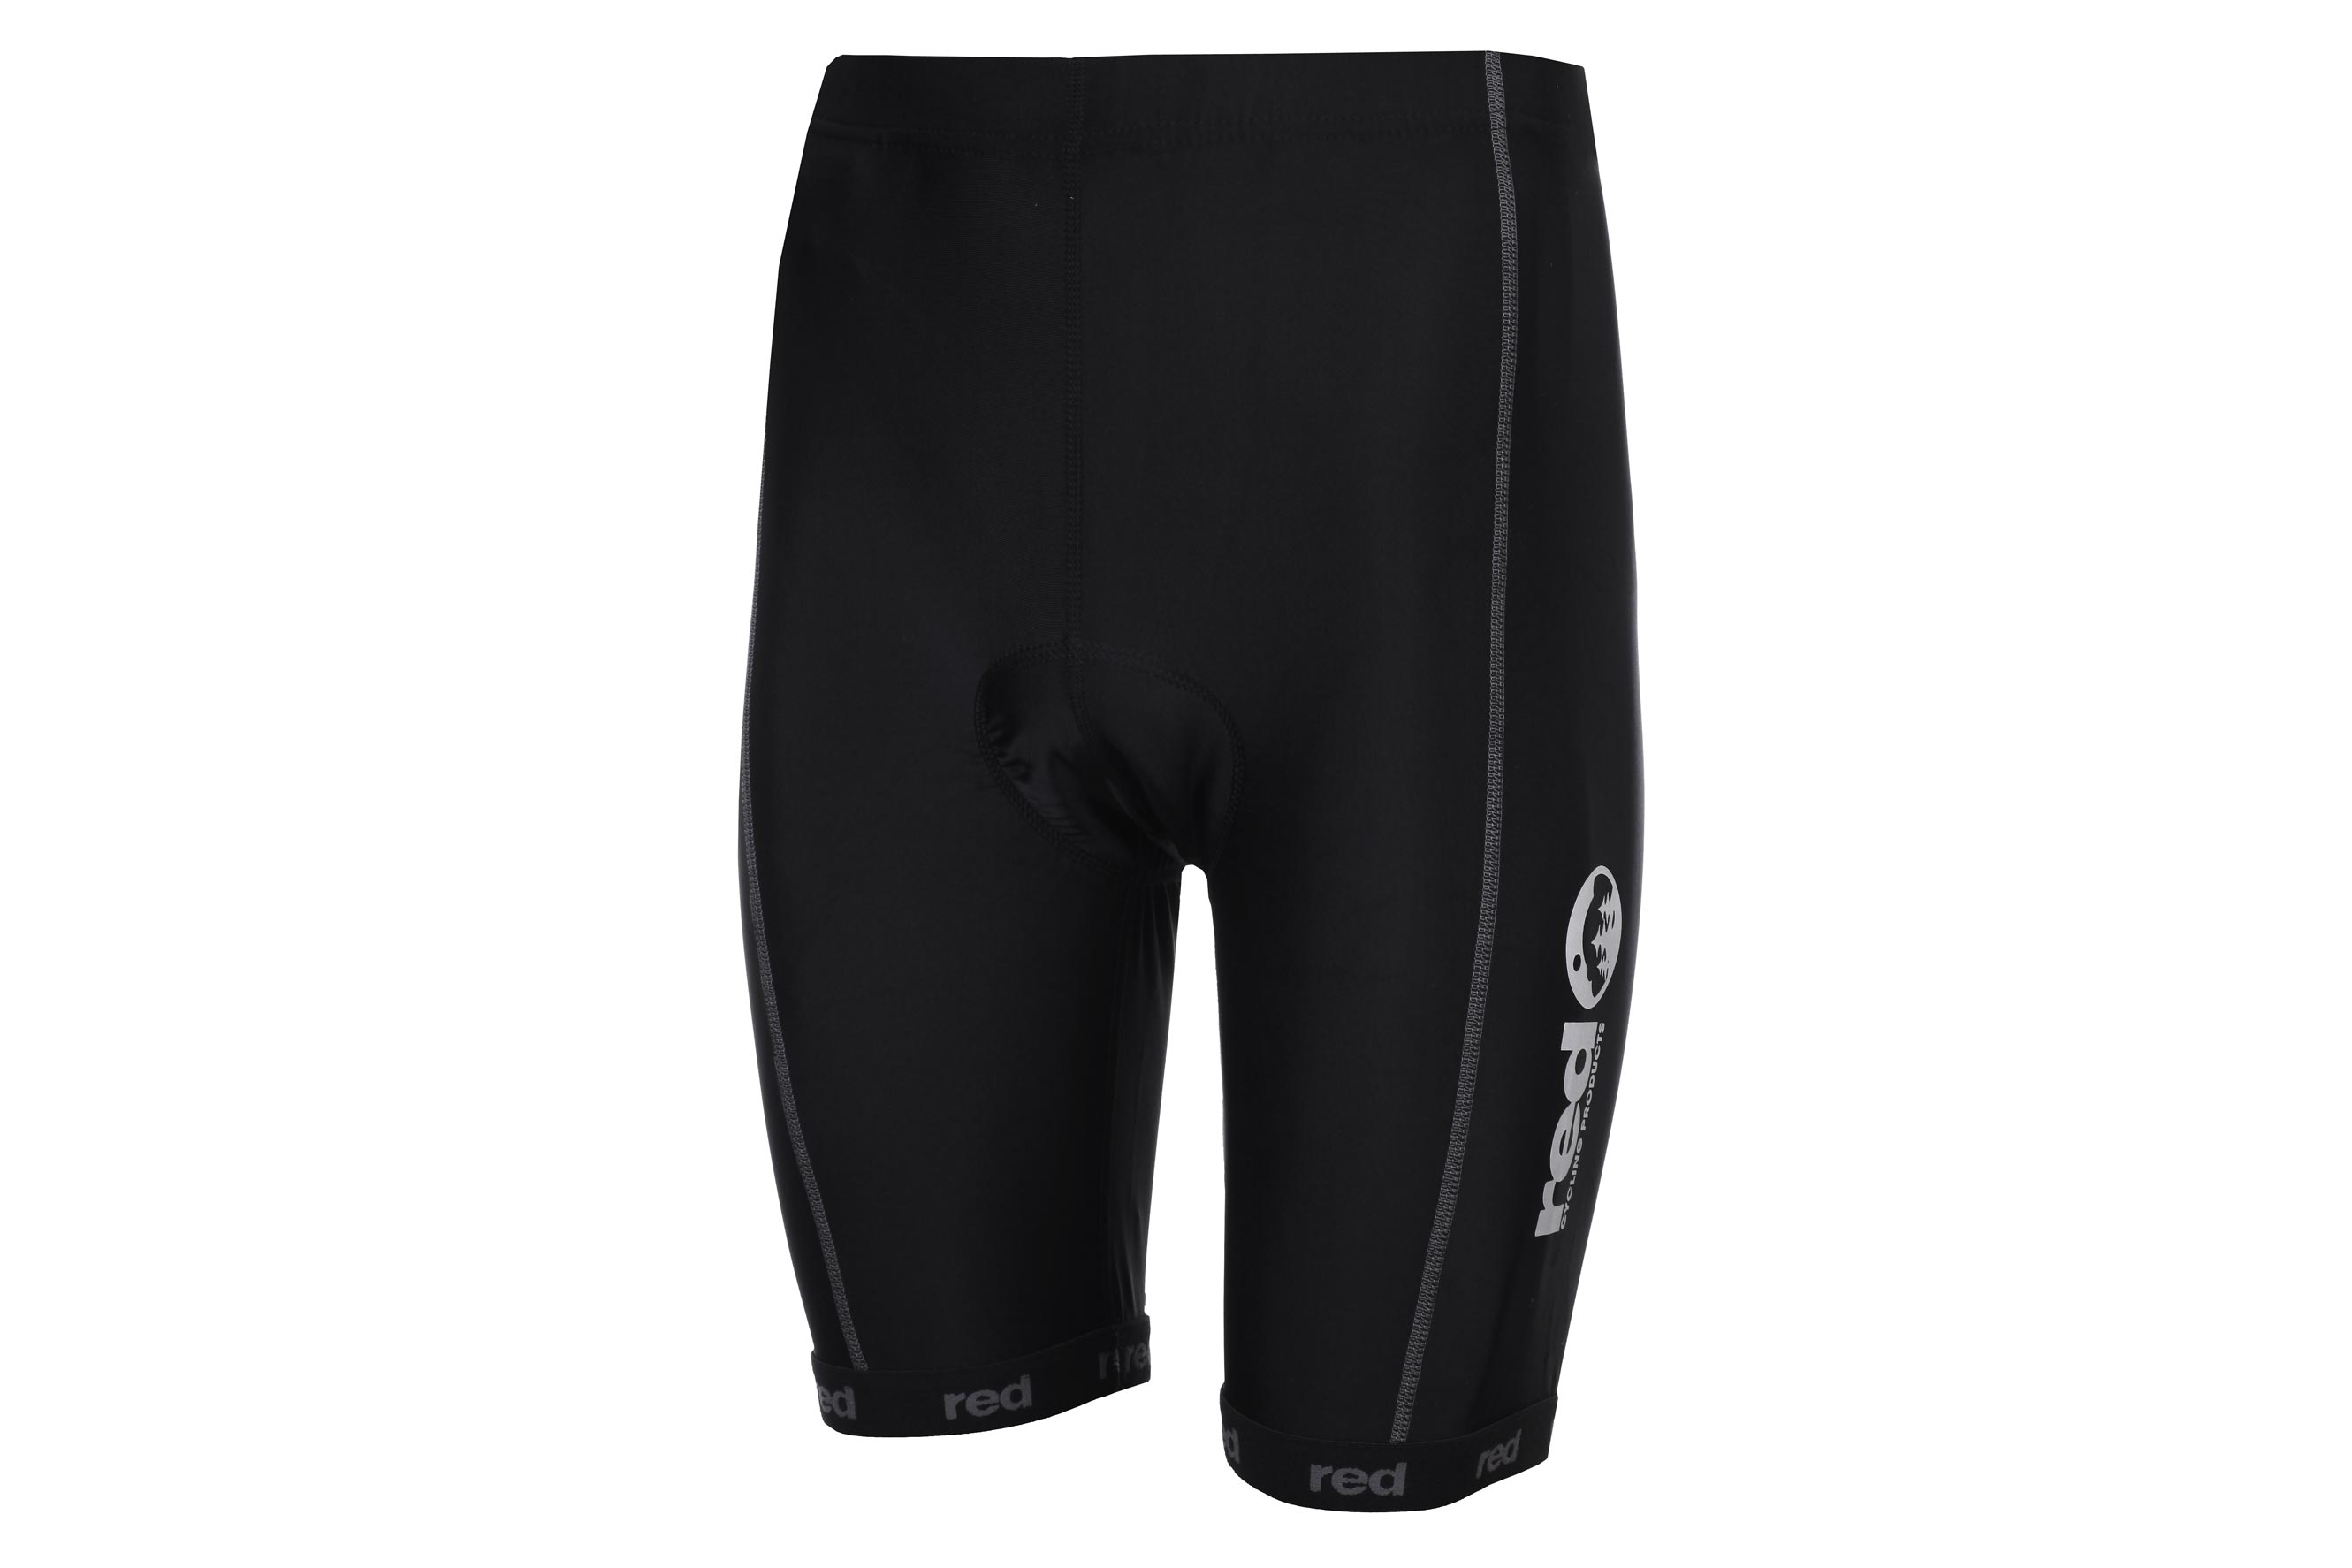 Foto Culotte para hombre Red Cycling Products Pro Short Coolmax negro, 3xl